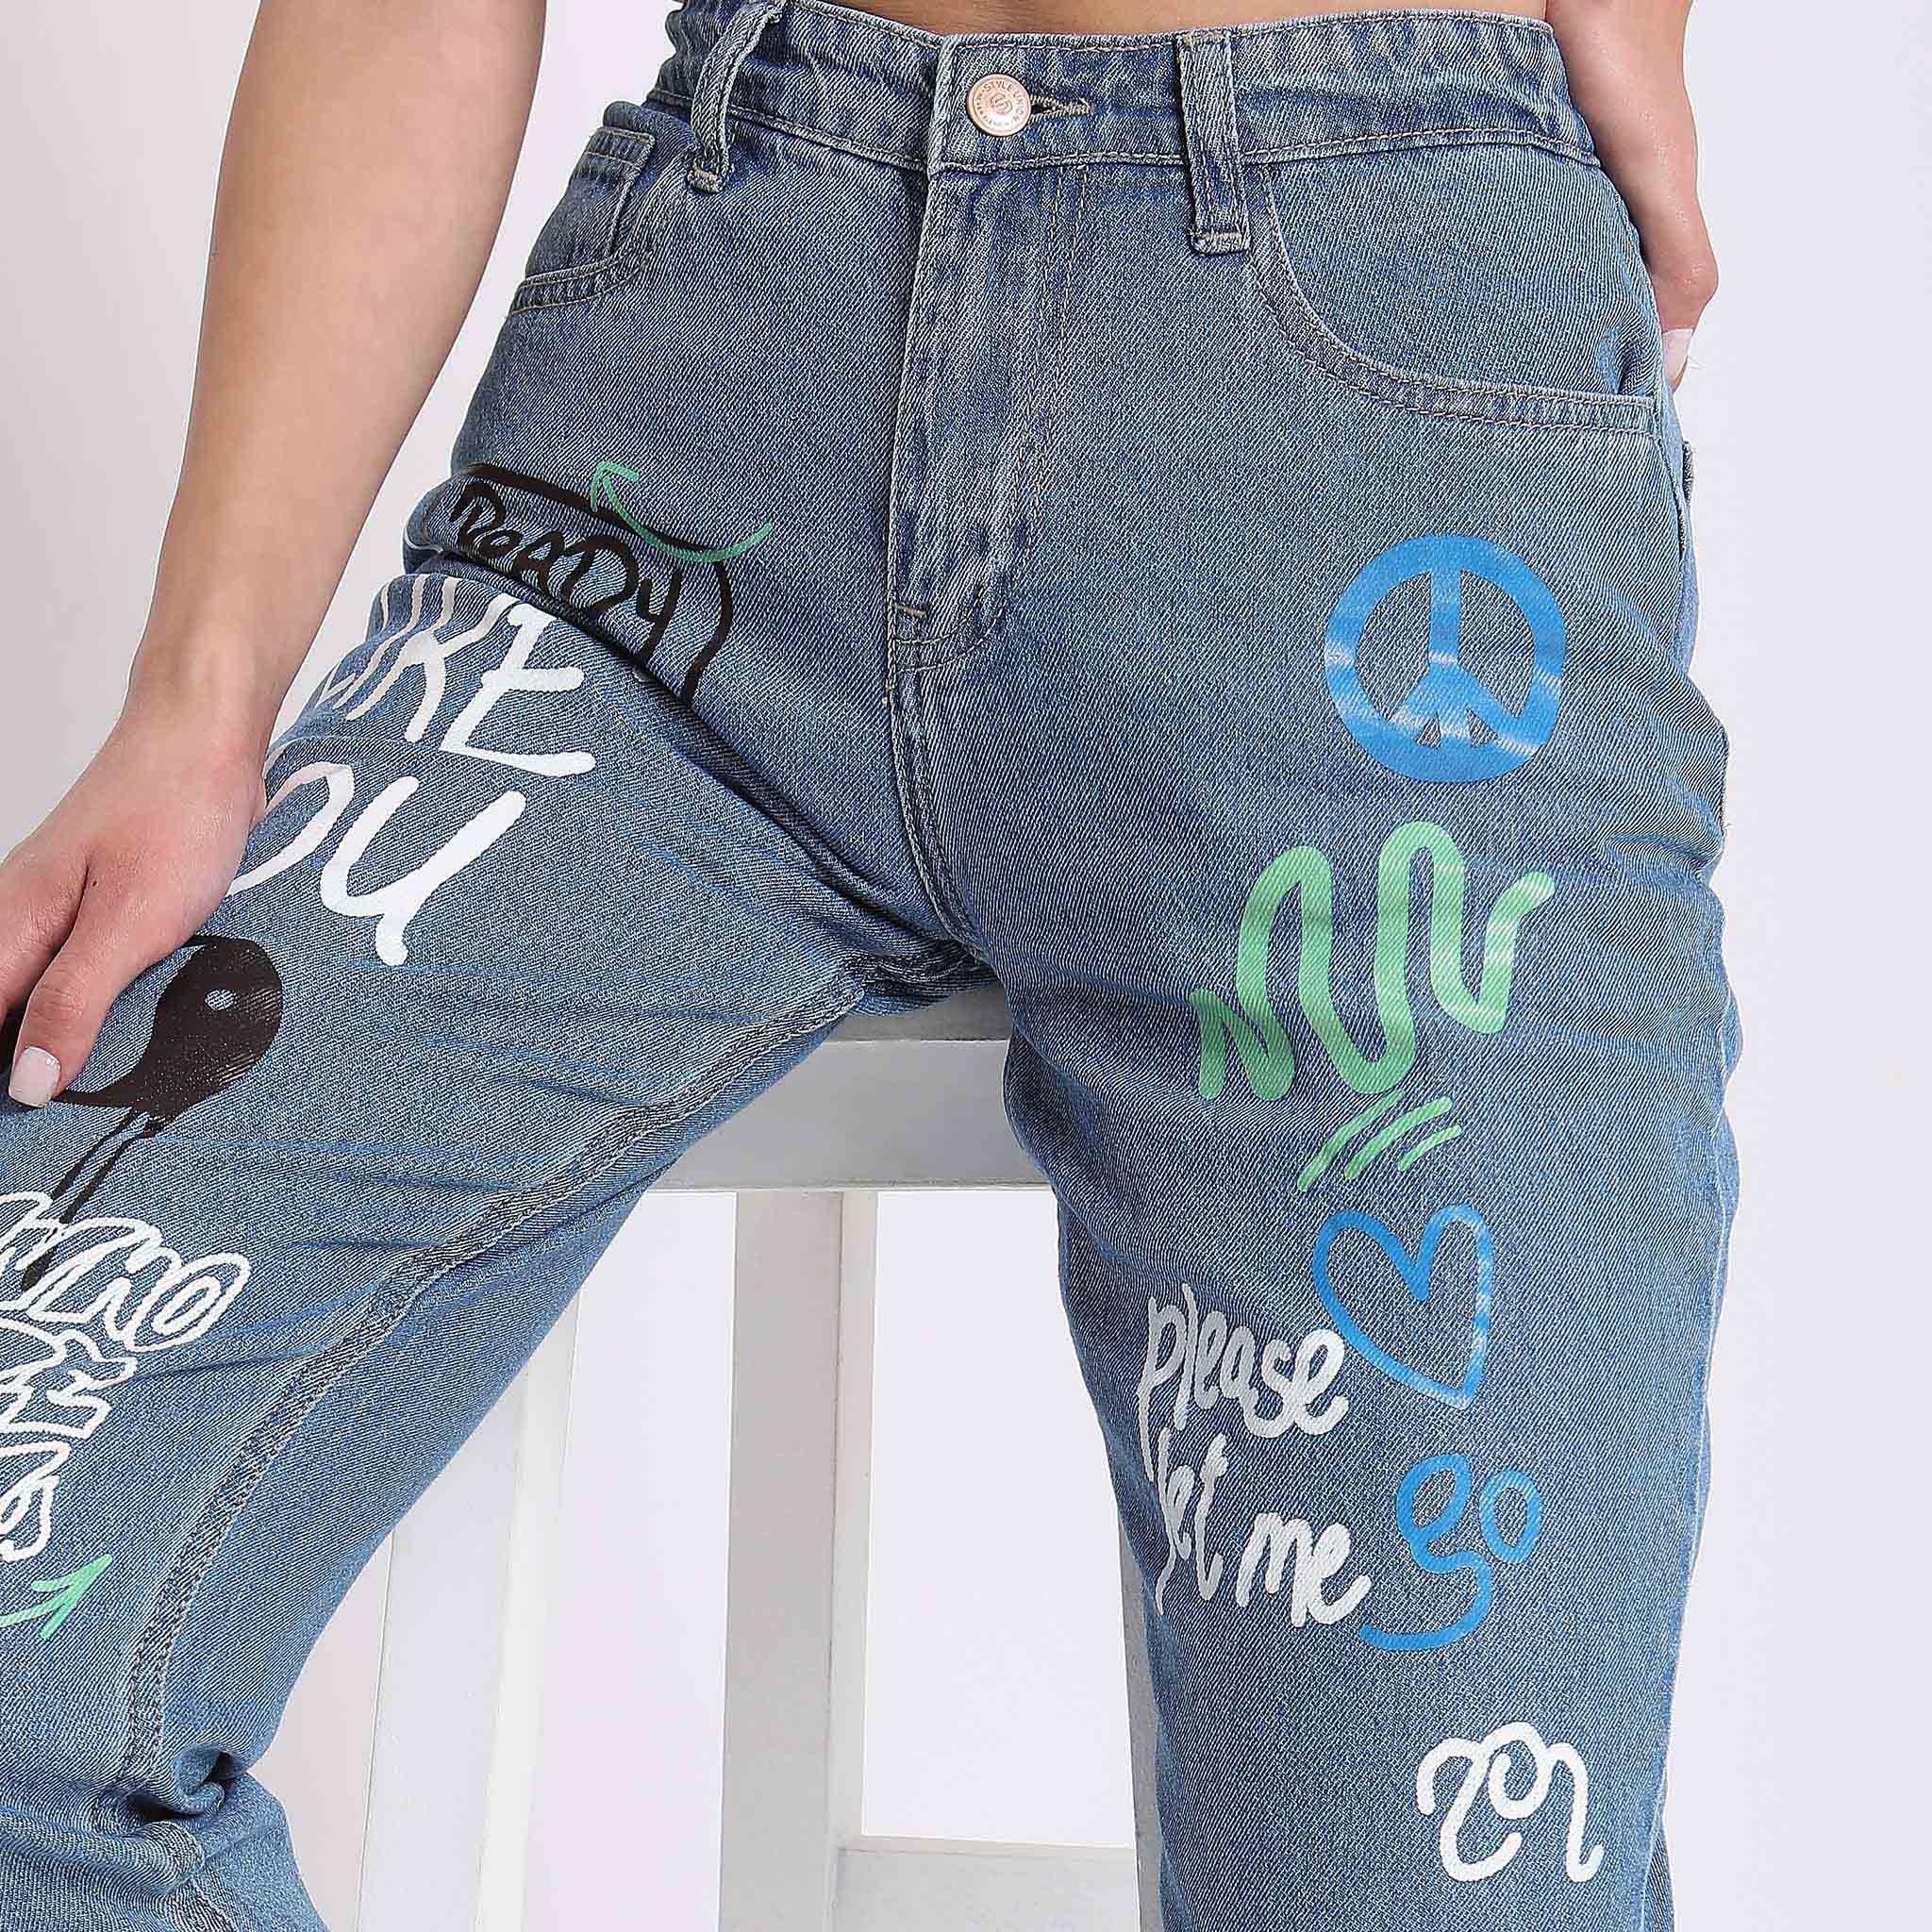 Regular Fit Printed Mid Rise Jeans